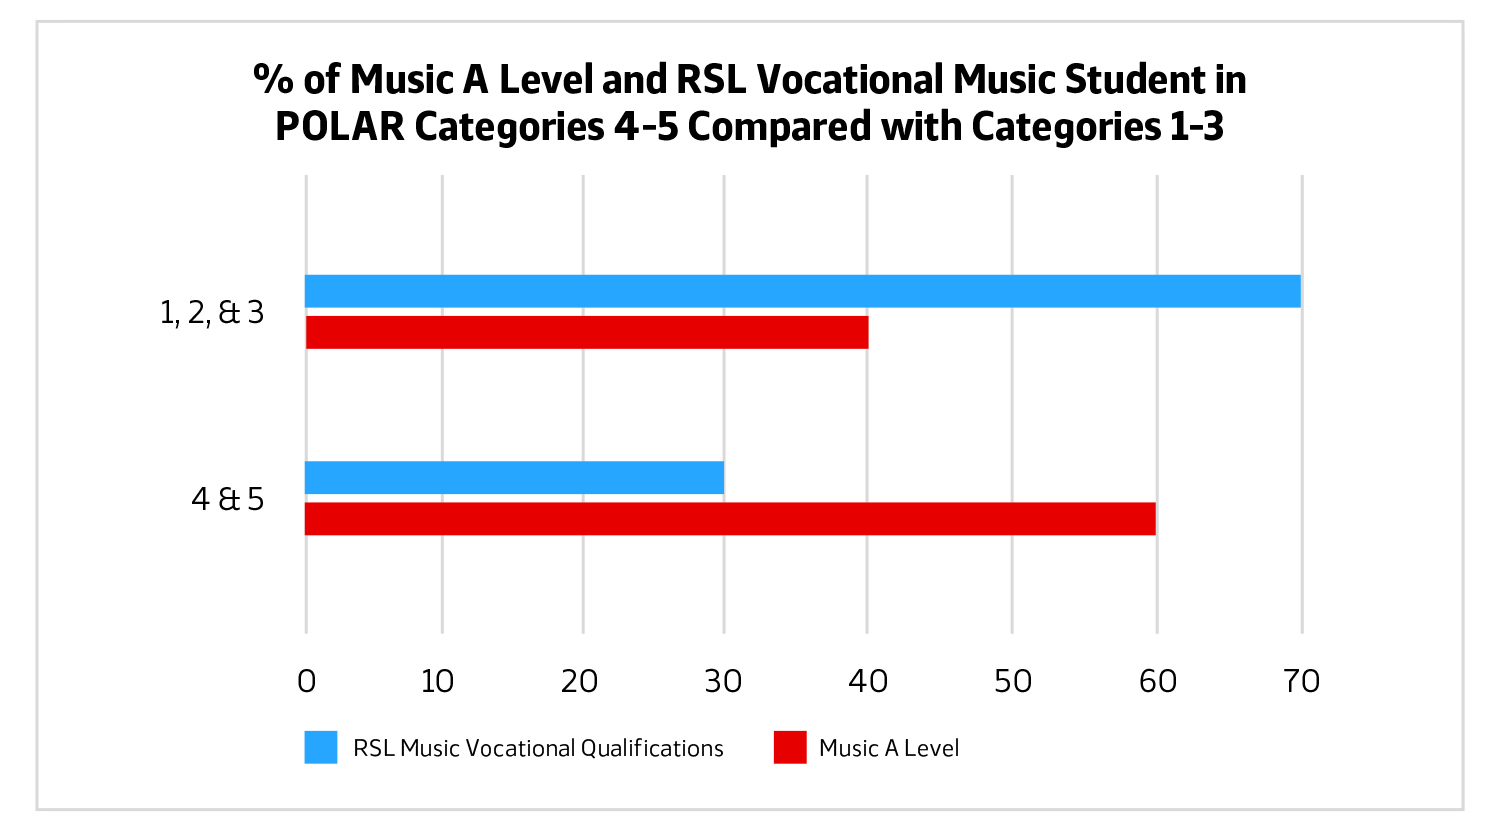 % of Music A Level and RSL Vocational Music Students in POLAR Categories 4-5 Compared with Categories 1-3